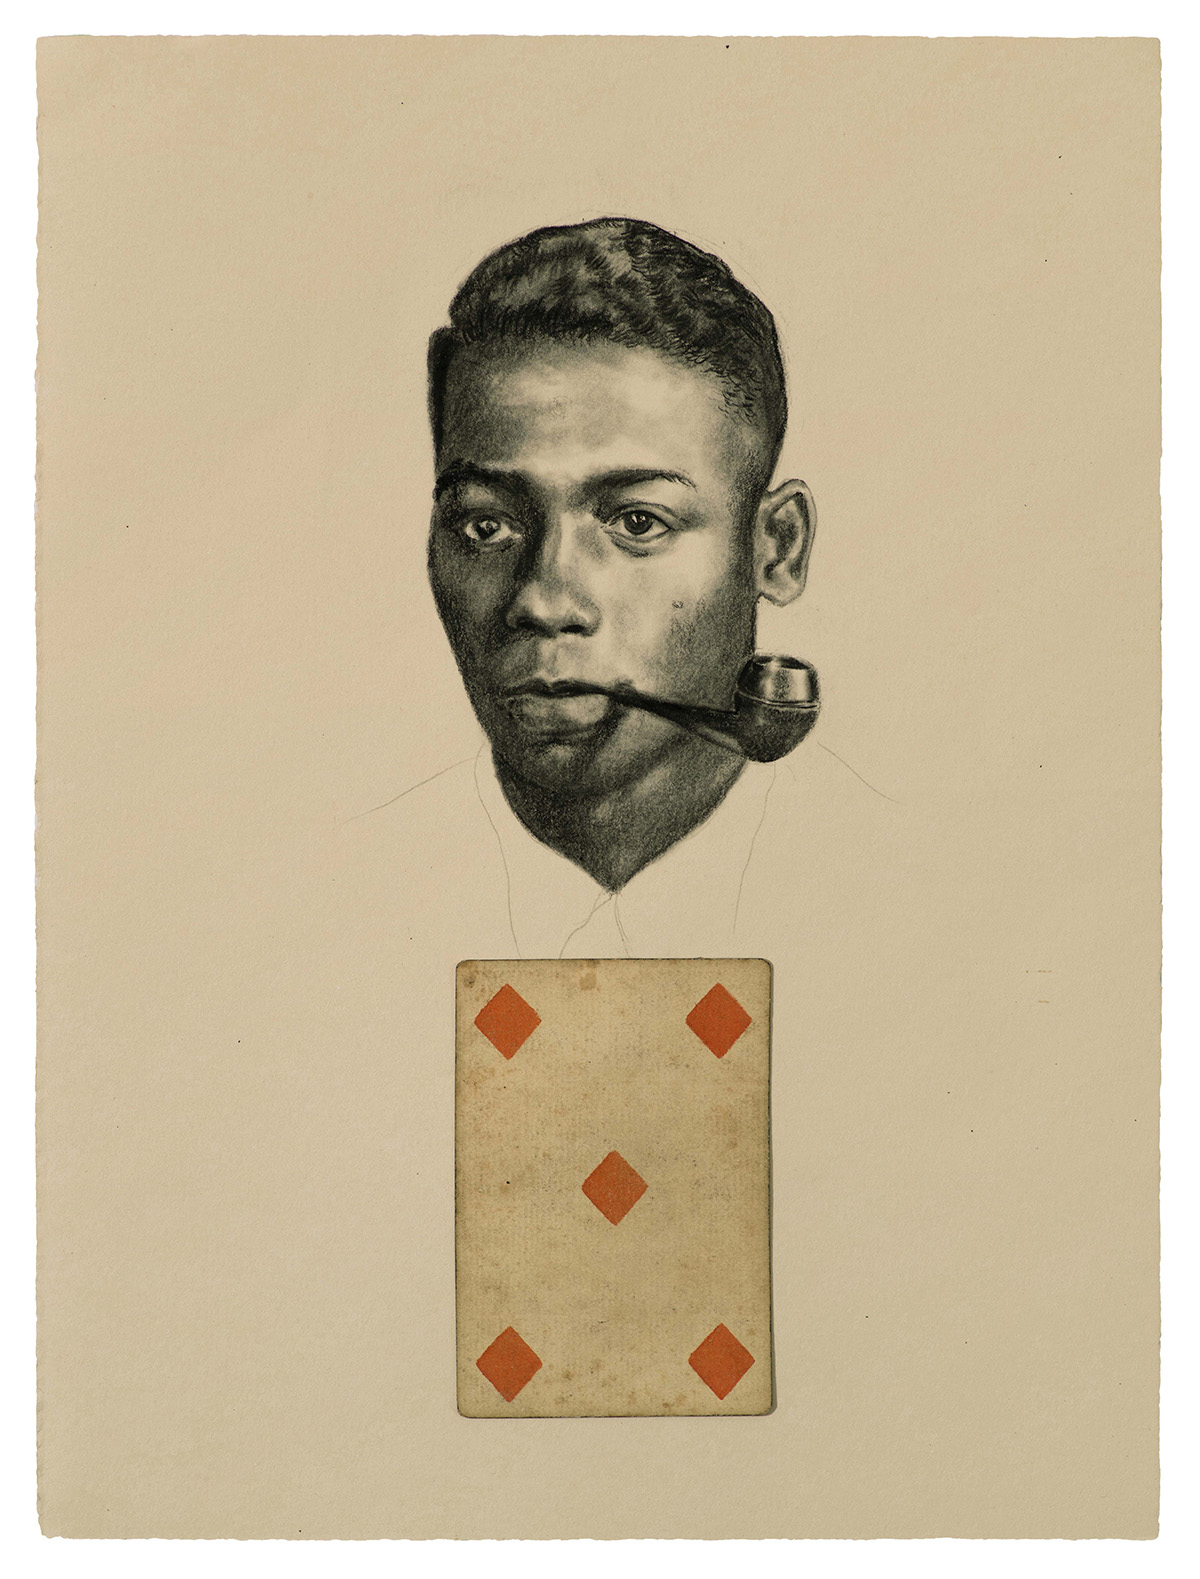 Disembodied head of a man with a pipe in his mouth. Floating beneath him is the 5 of diamonds card from a standard french deck.